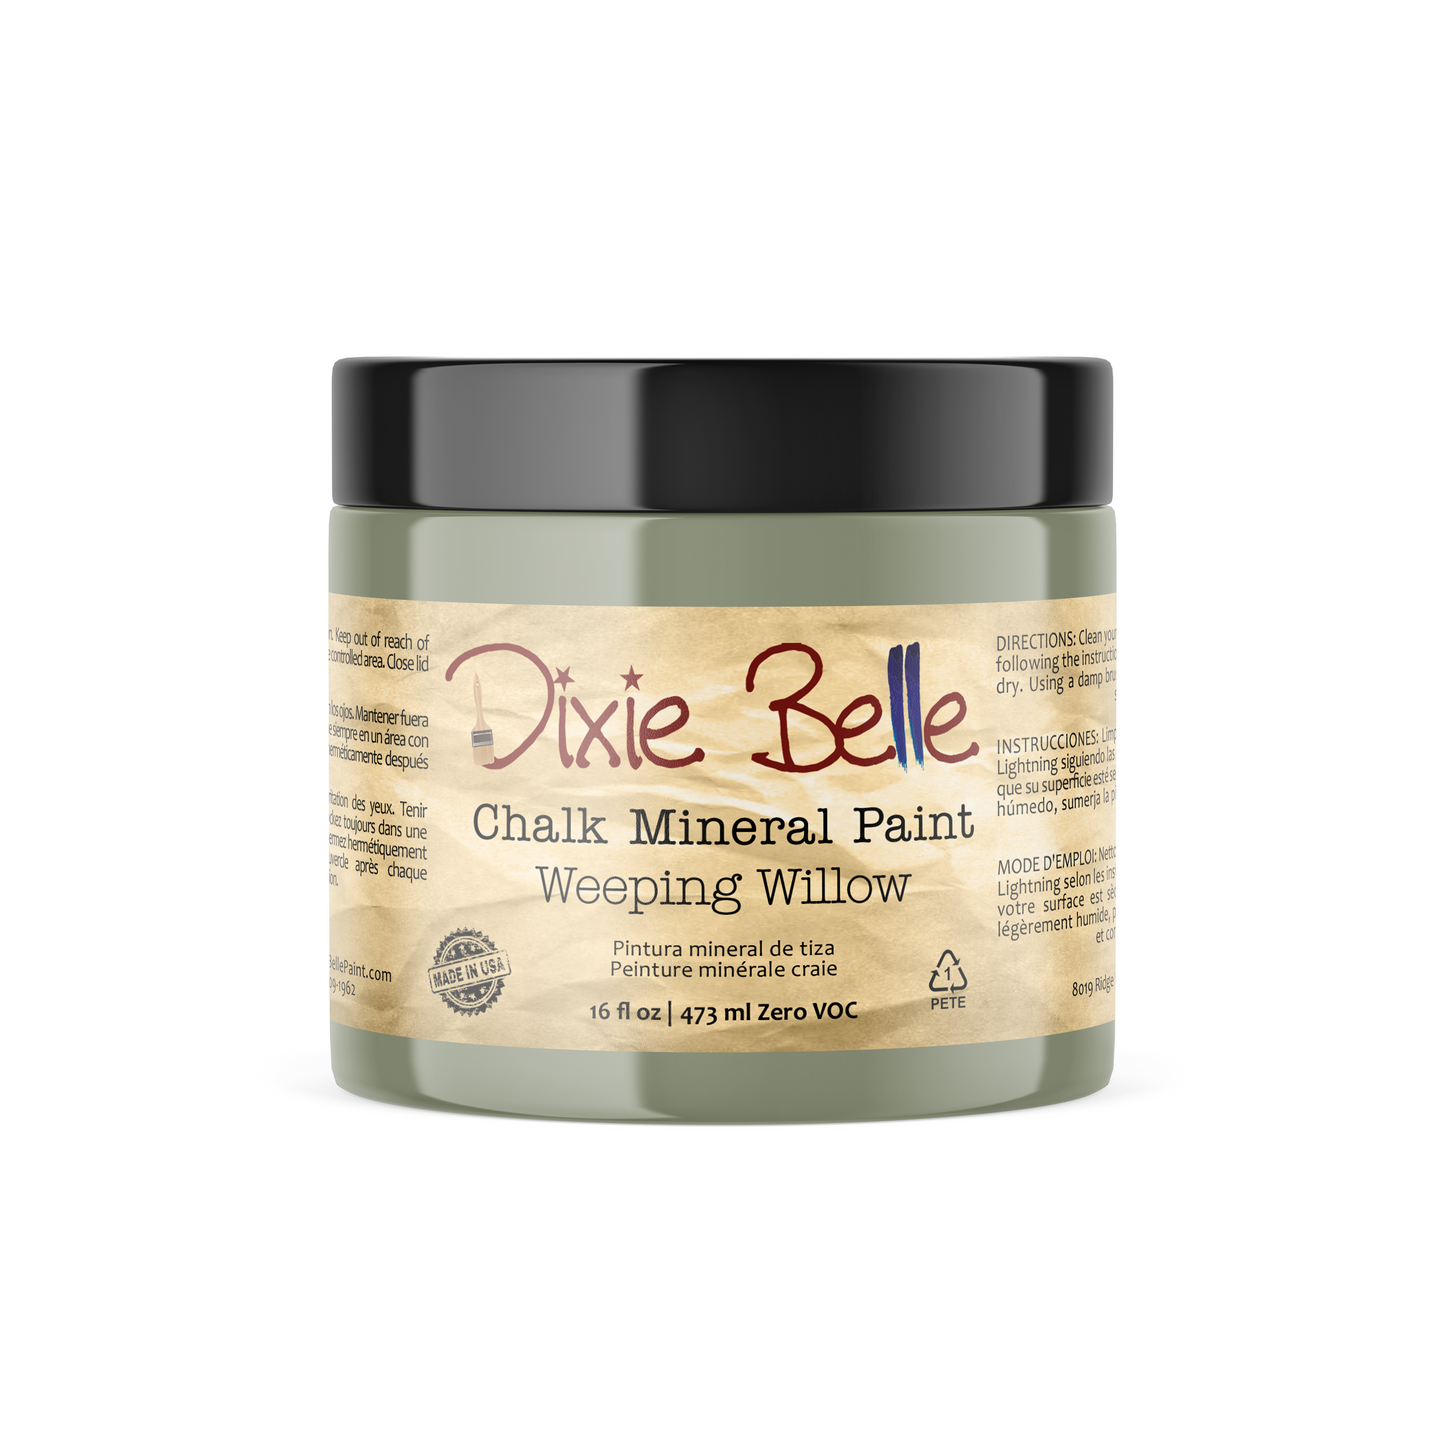 Weeping Willow - Dixie Belle Chalk Mineral Paint